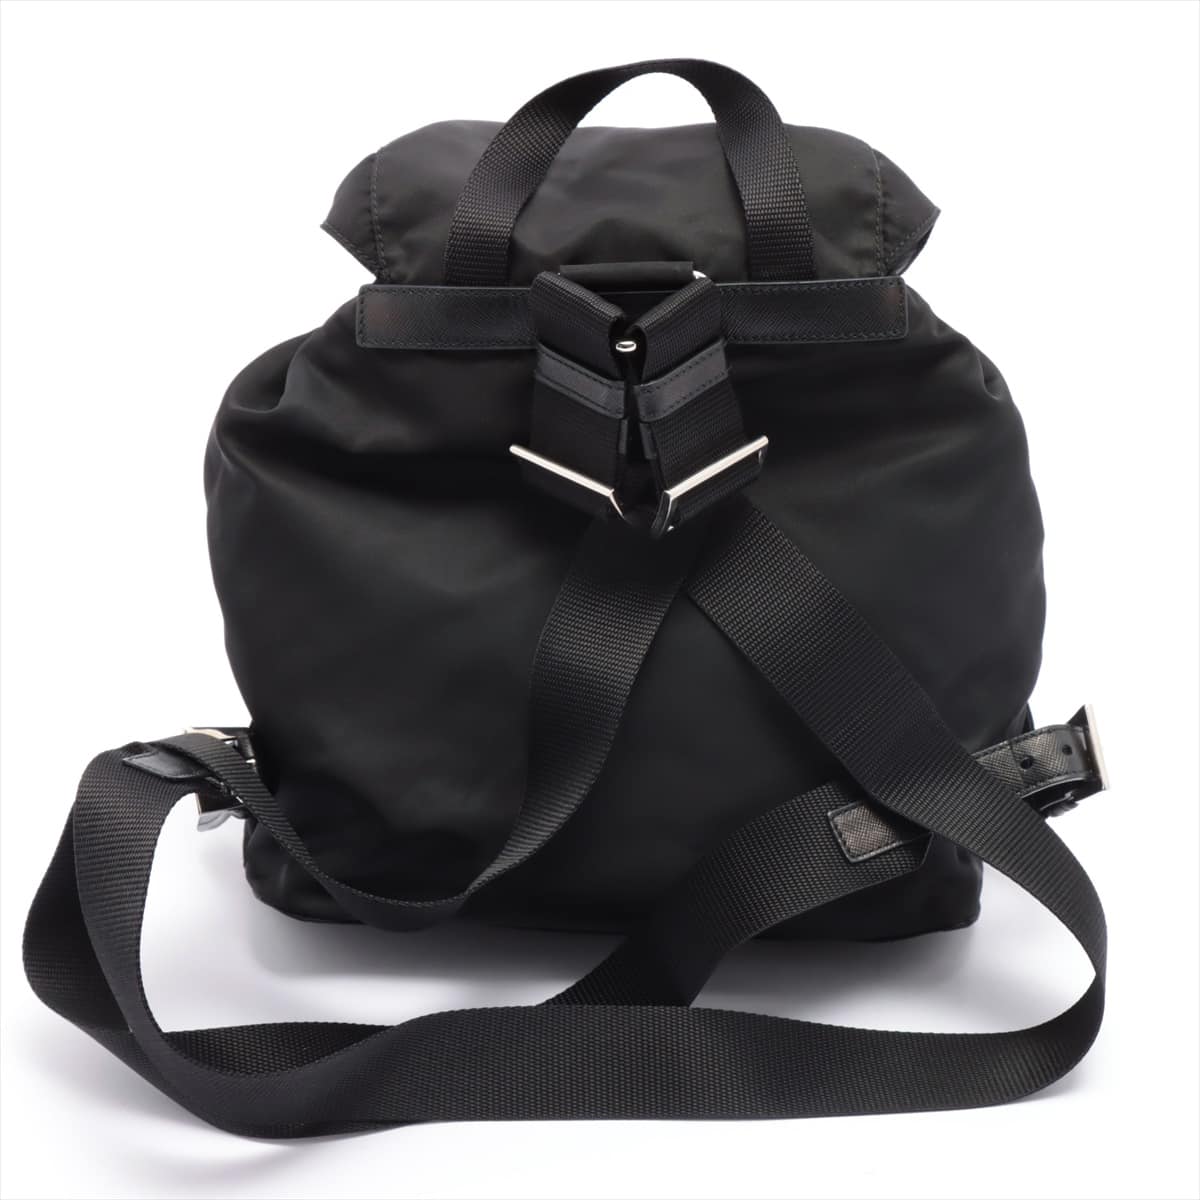 Prada Tessuto Backpack Black 1BZ677 open papers There is a tear in the upper string